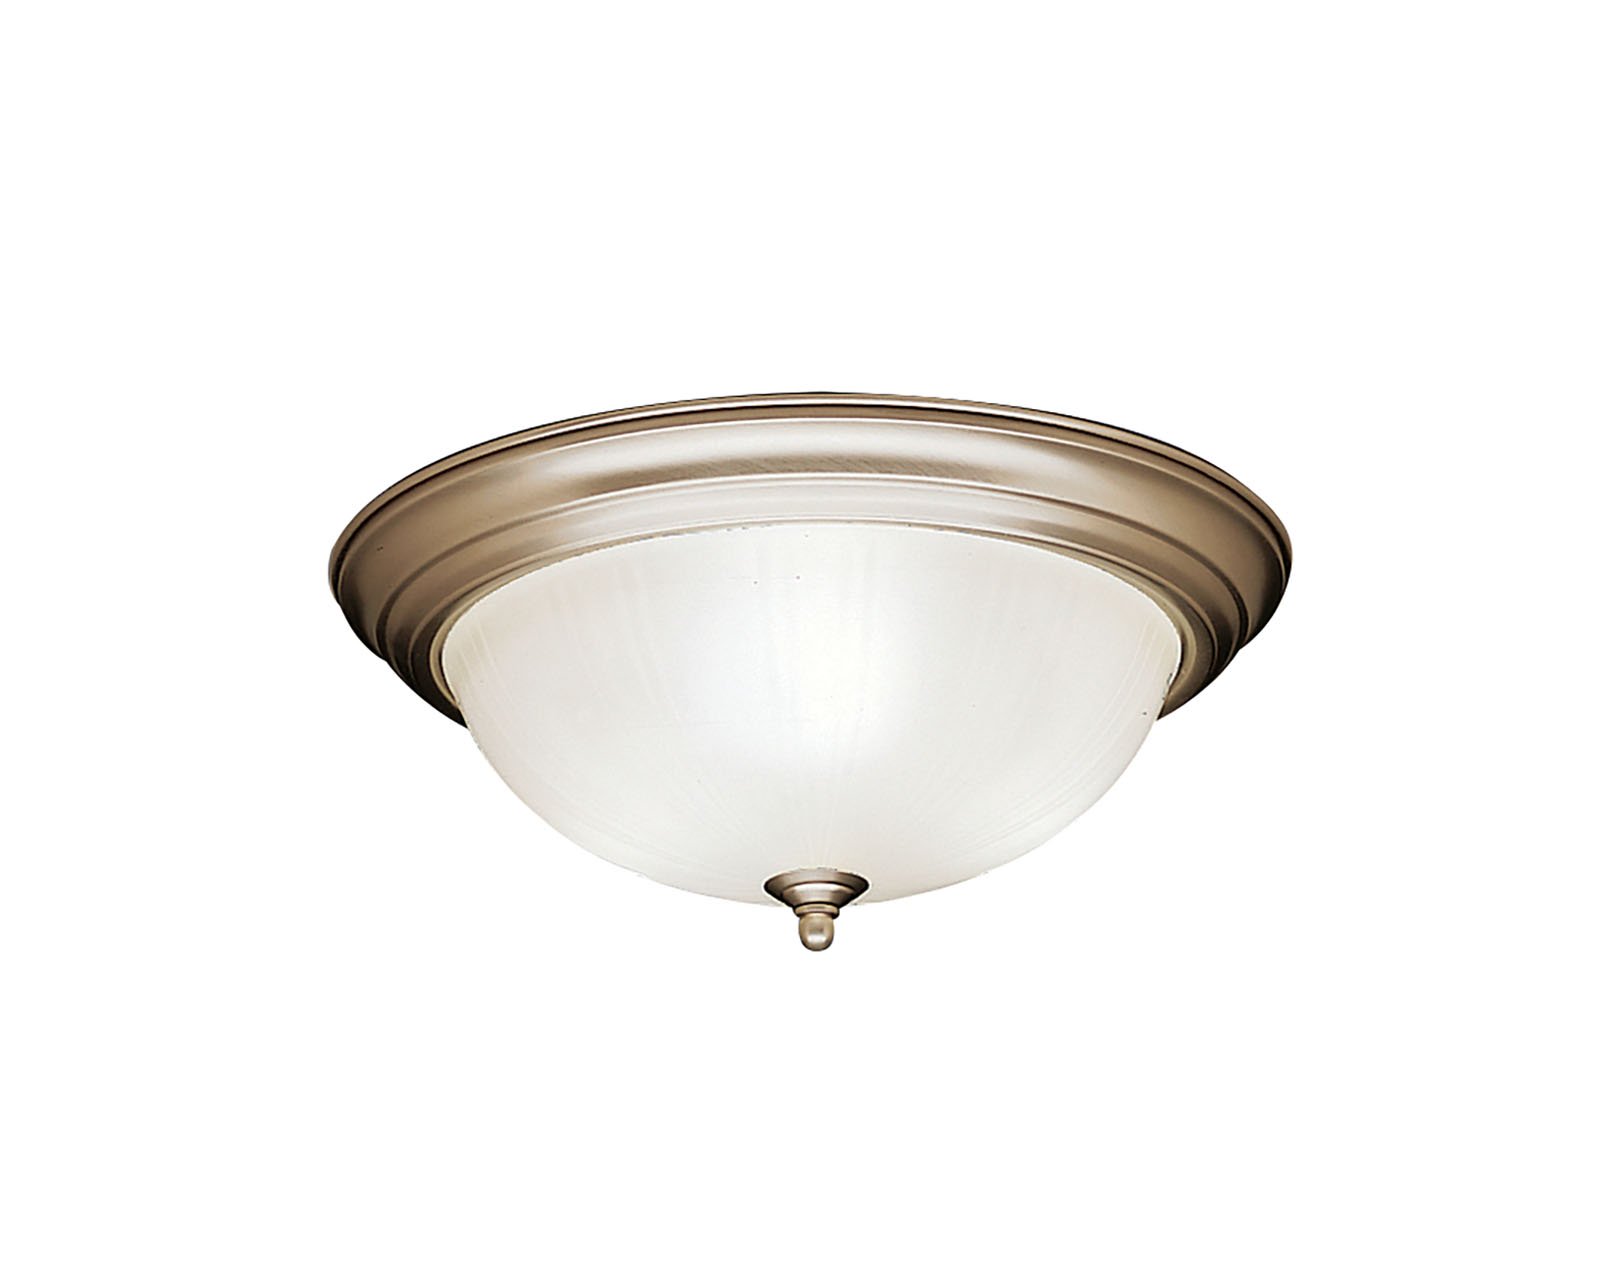 The Hastings Collection takes classic design and offers its own unique, modern twist. Characterized by its long, sweeping arms, Hastings fixtures offer a clean look while remaining fresh and exciting. With our Brushed Nickel finish over its hand-wrought steel frame, you can be sure of a high quality fit and finish that is second to none. This flush mount ceiling fixture is perfect for the homeowner looking to add a classic touch. Its 3 light design utilizes Satin-etched glass to add elegance to your home's ceilings.